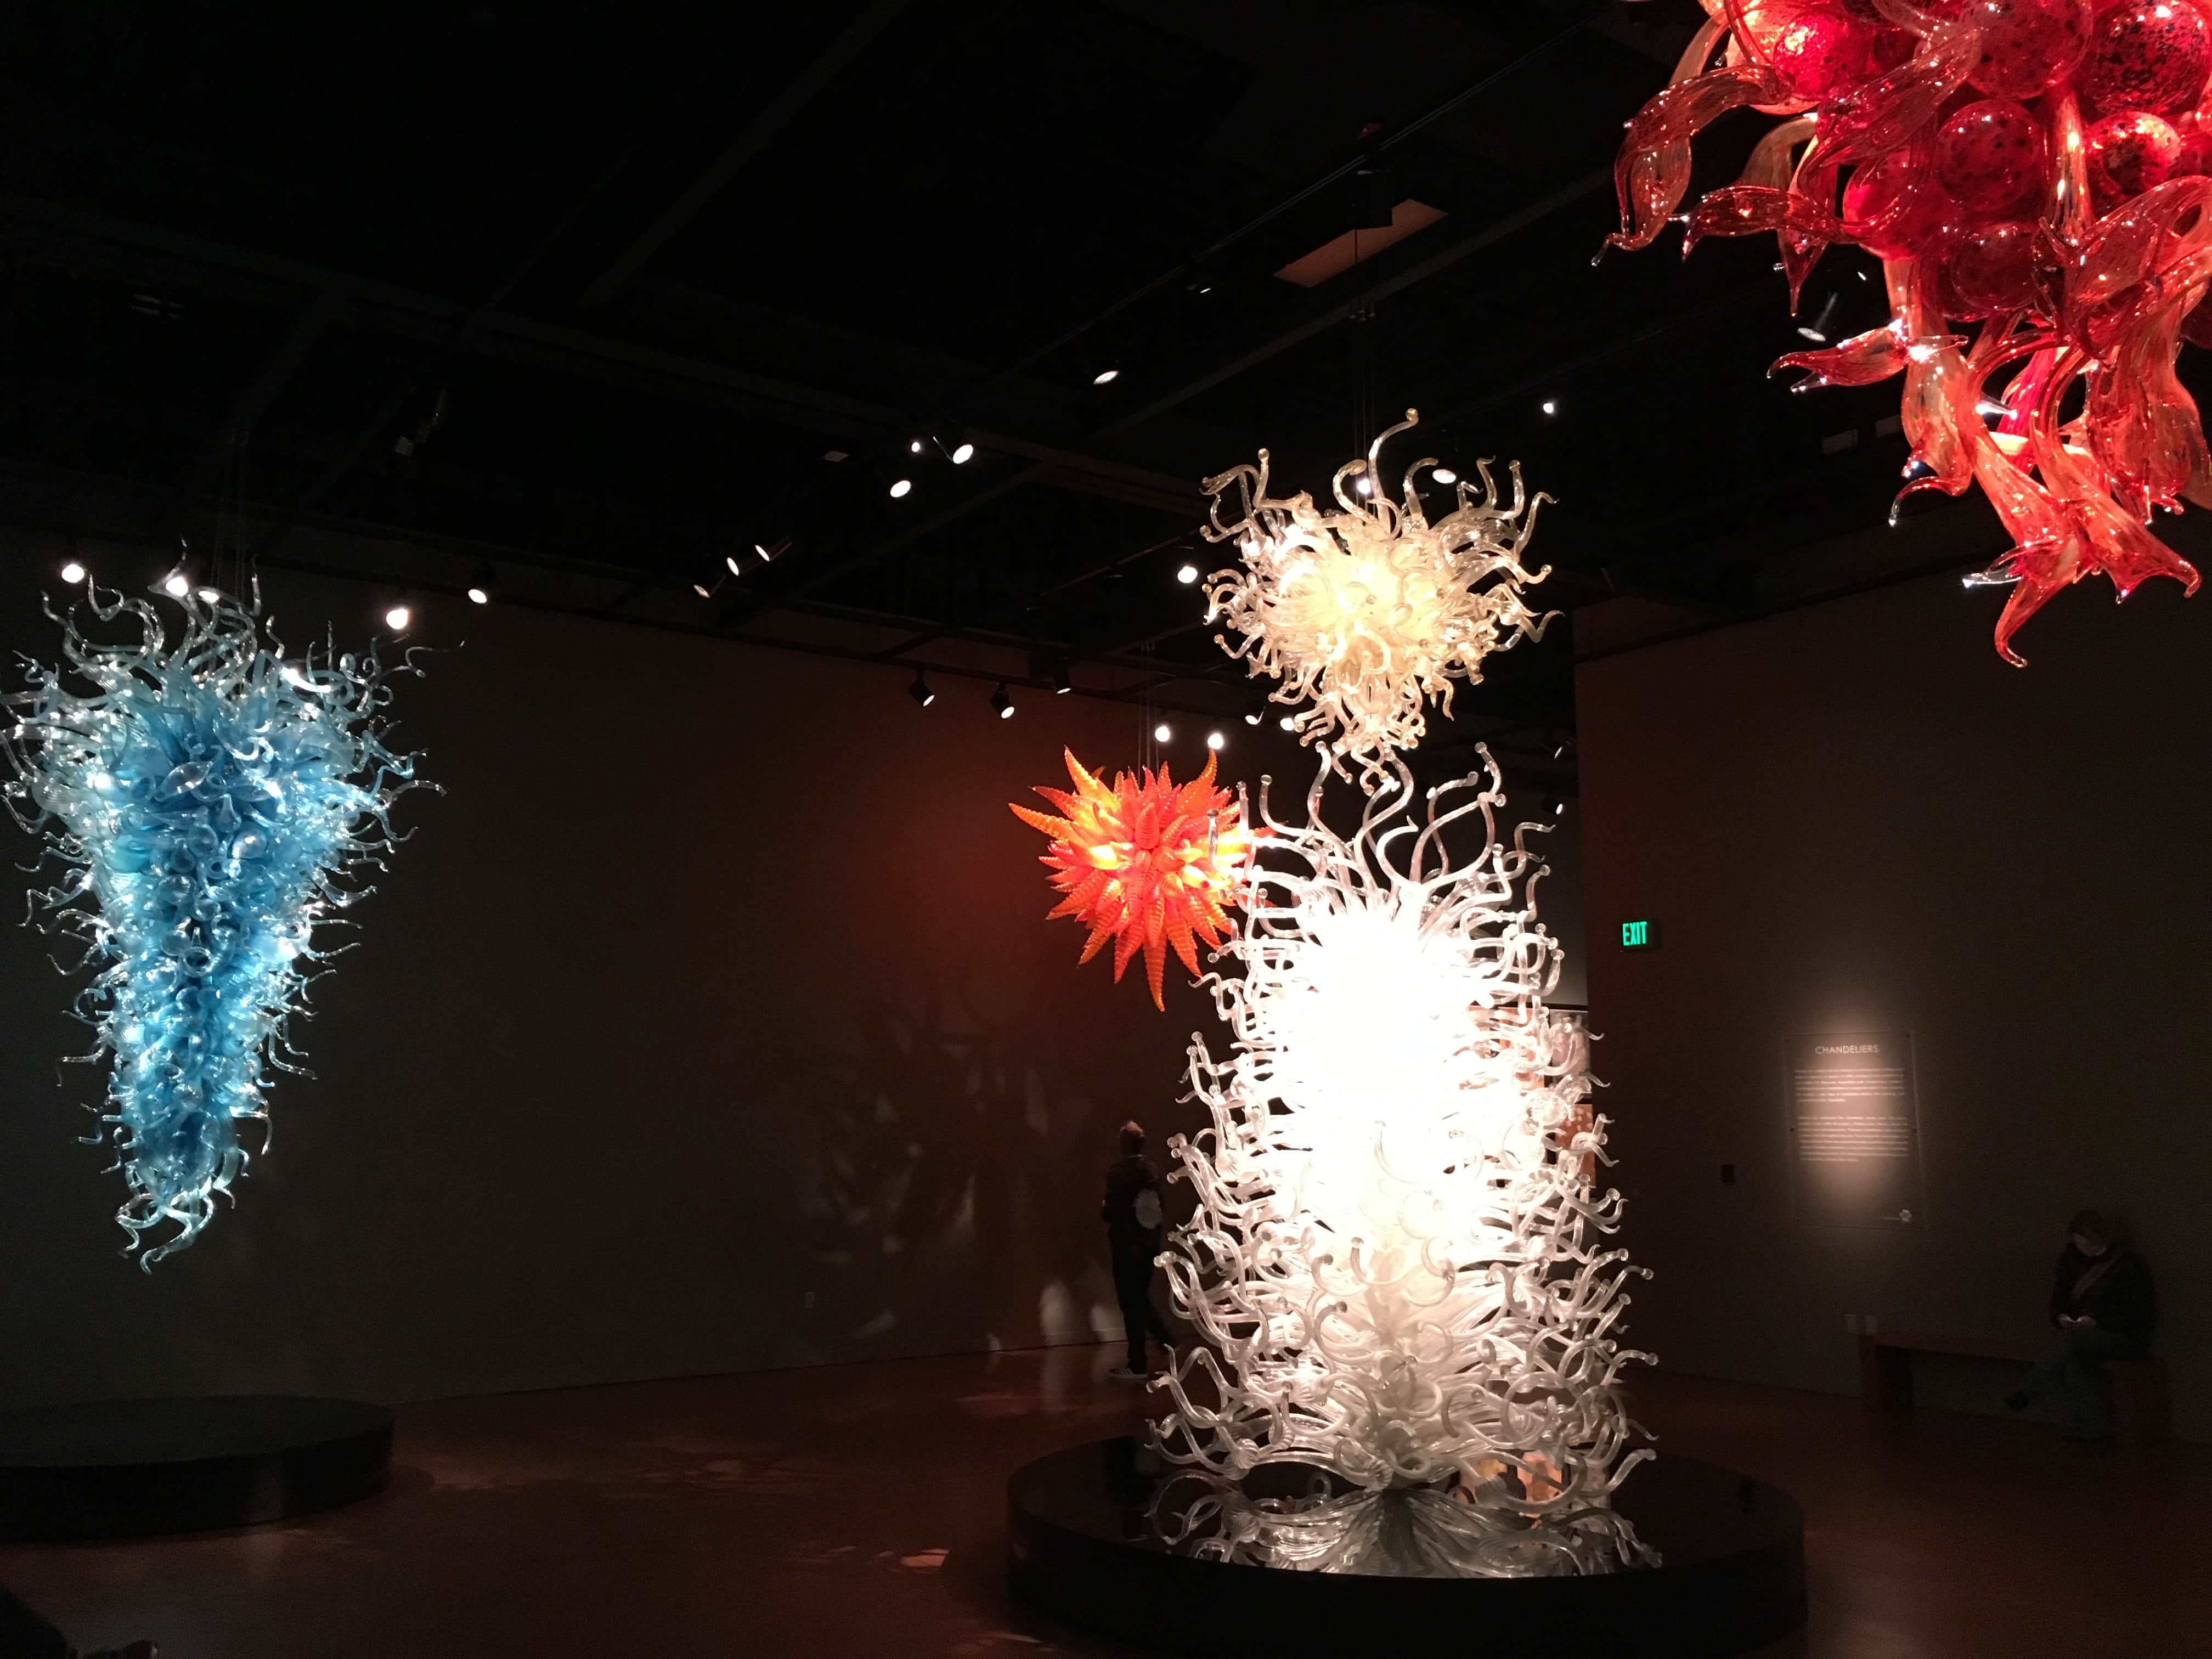 Chandeliers at Chihuly Garden and Glass in Seattle, Washington